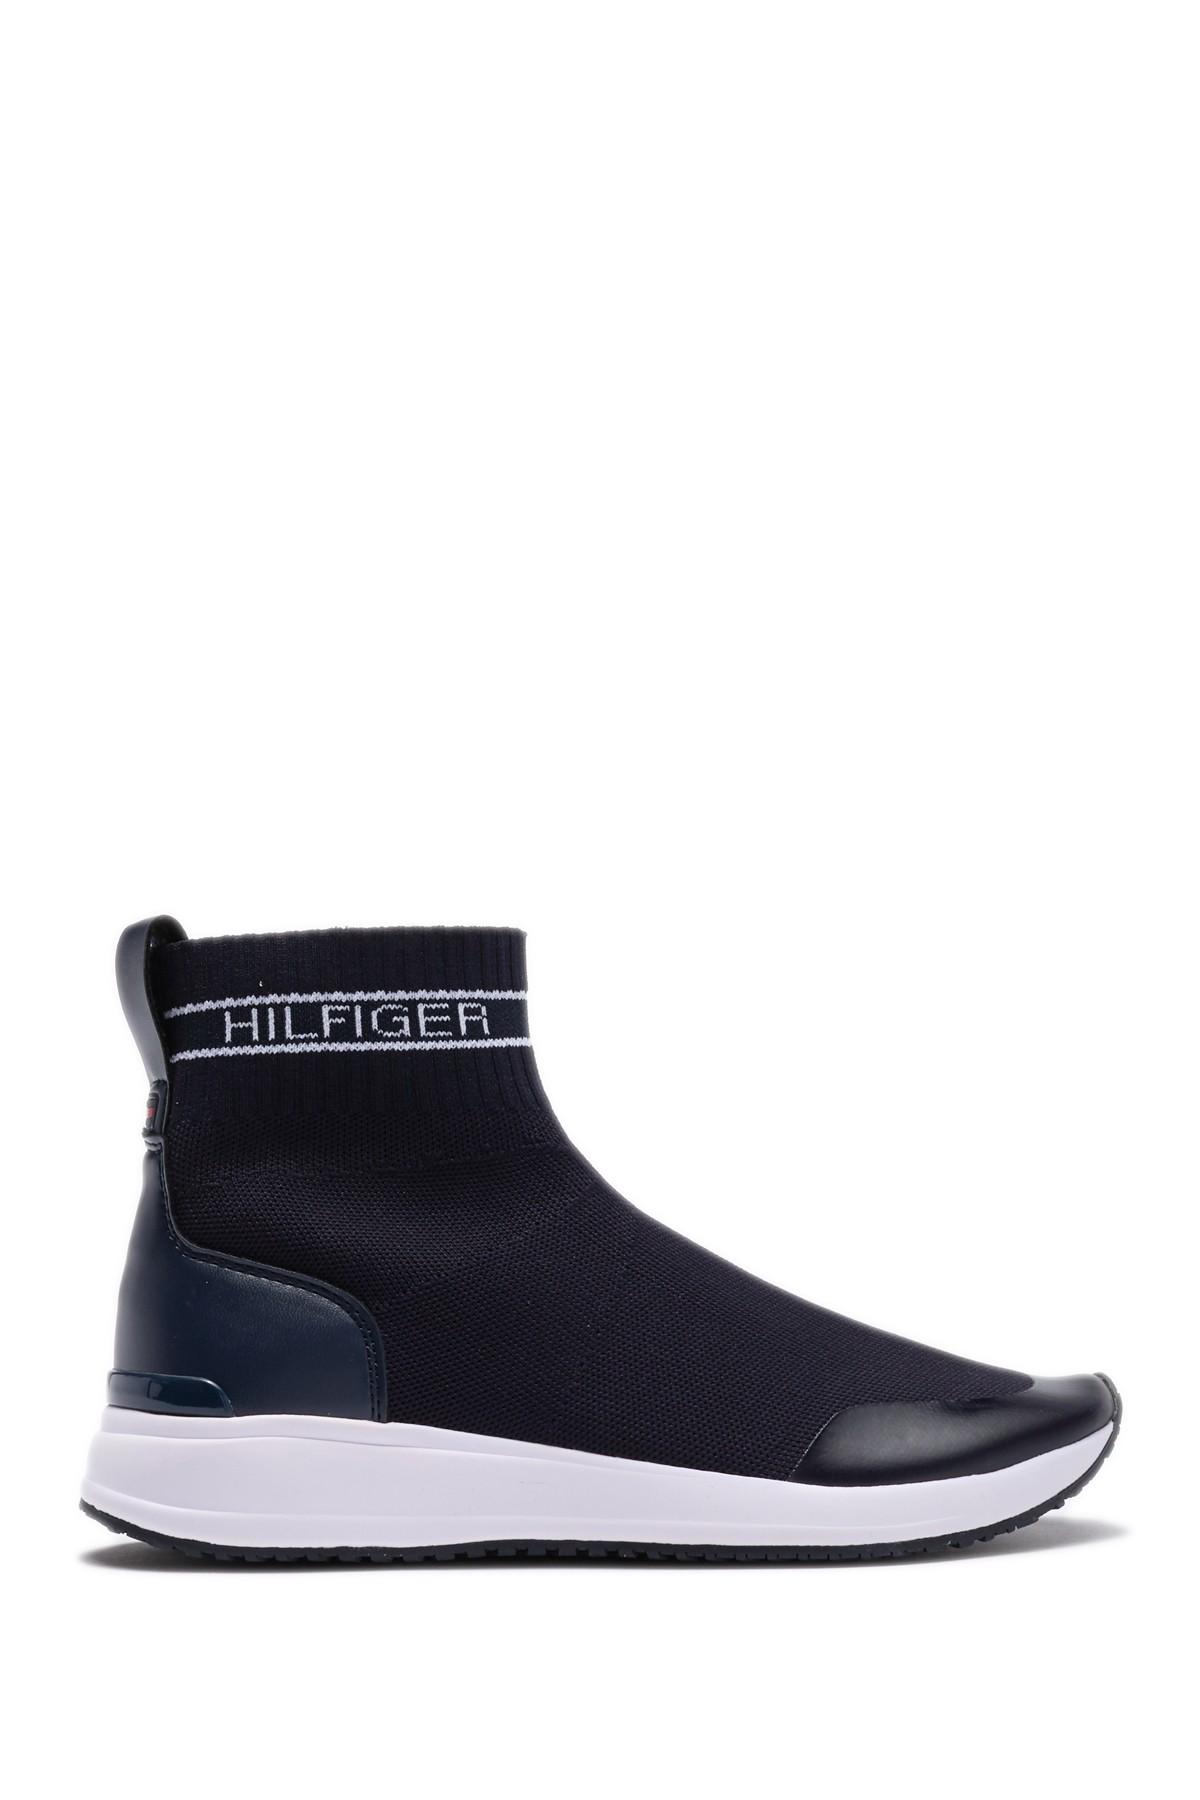 tommy hilfiger reco sock sneakers